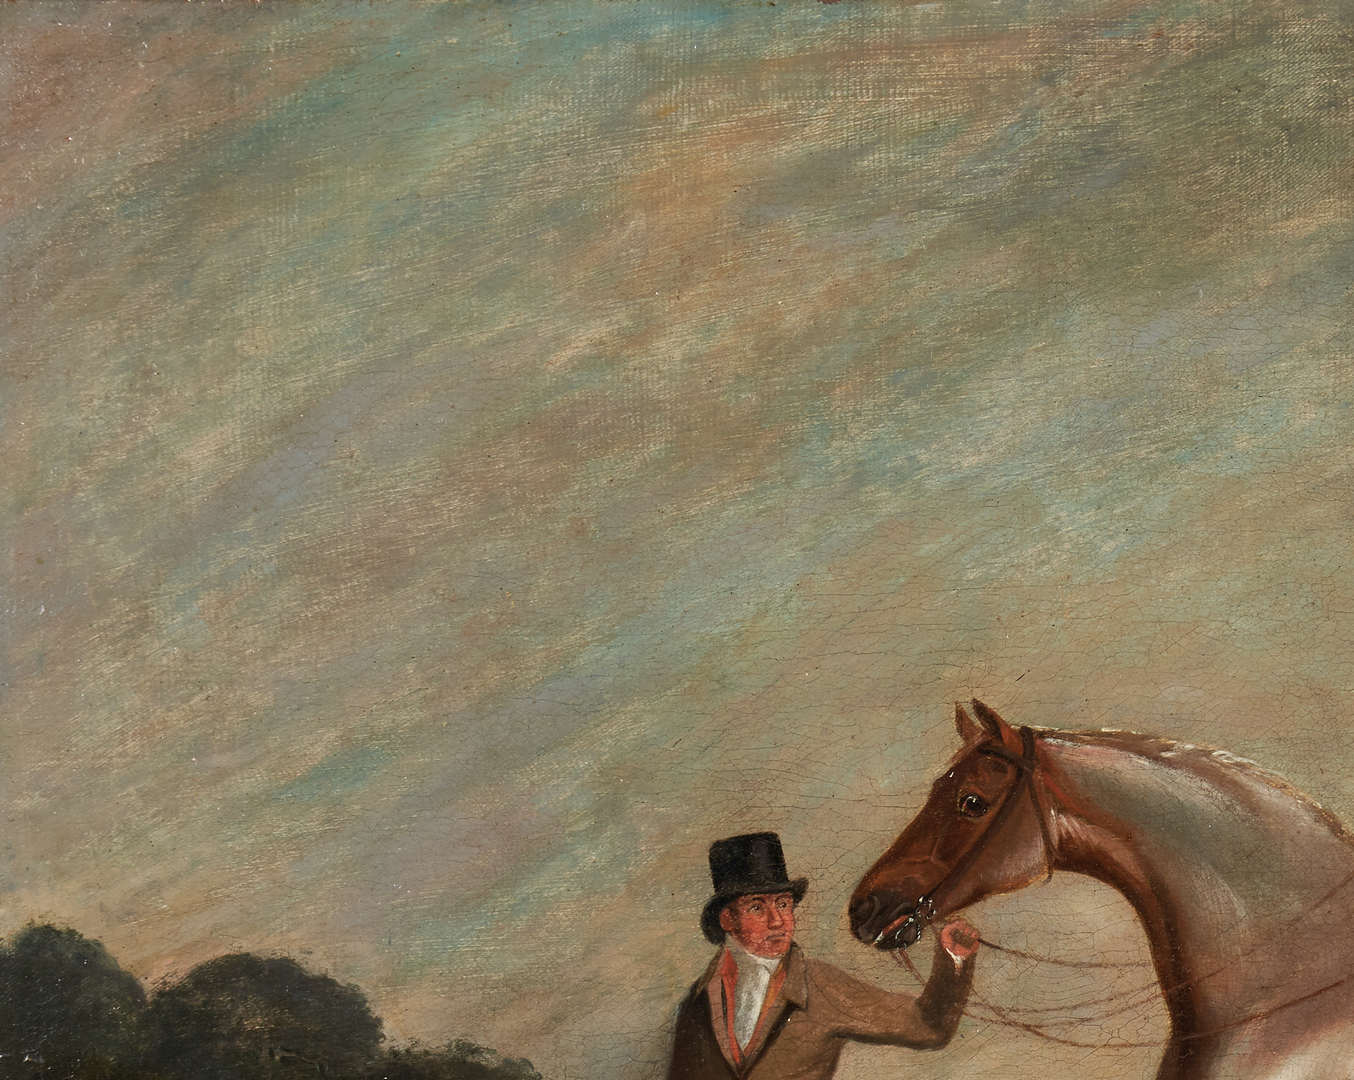 Lot 64: Edwin Cooper O/C Equestrian Painting, Gentleman with a Hunter Beside a Stable